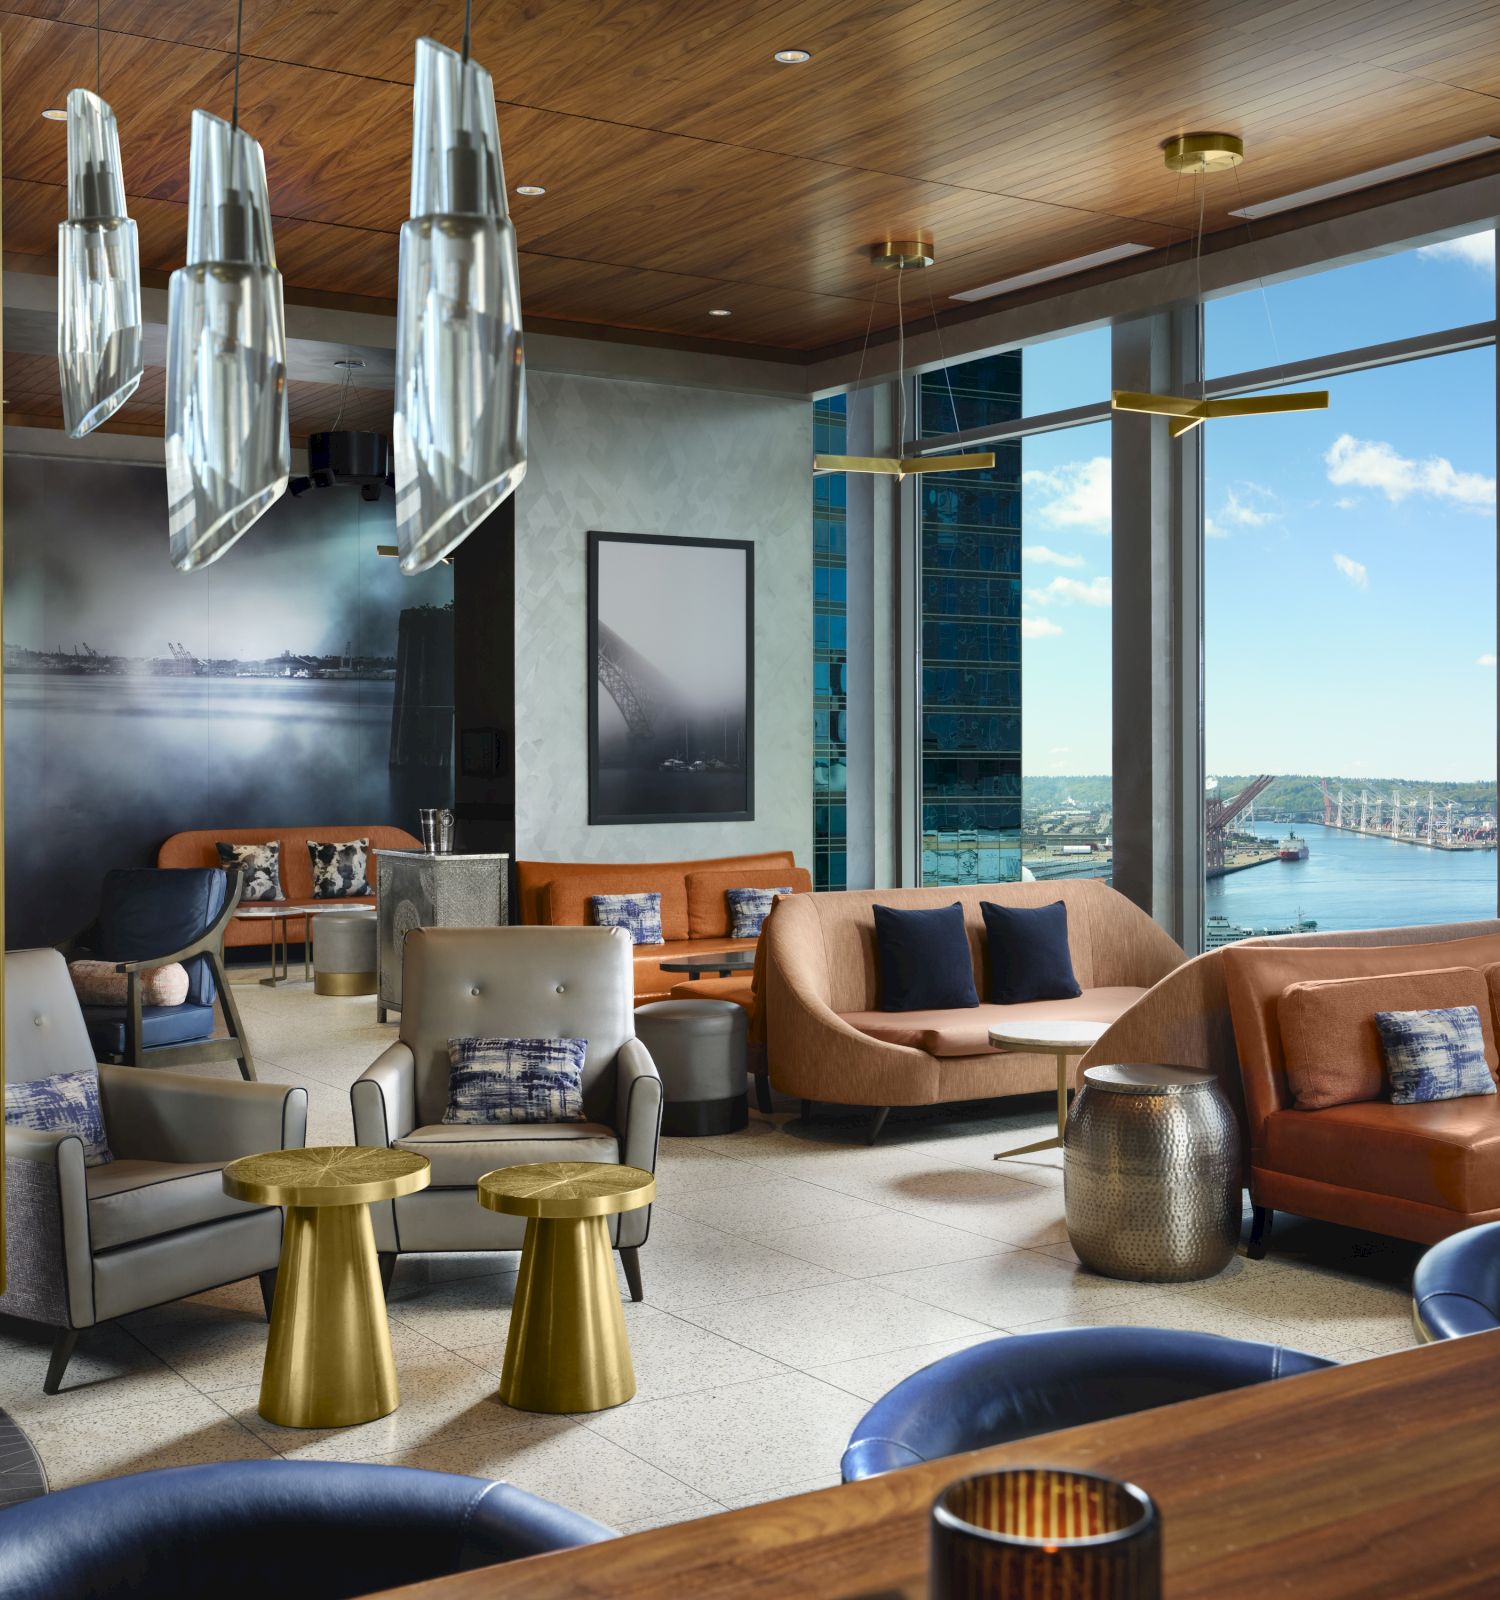 A modern lounge with stylish seating, unique lighting fixtures, and large windows providing a scenic view of a waterfront and Ferris wheel in the distance.